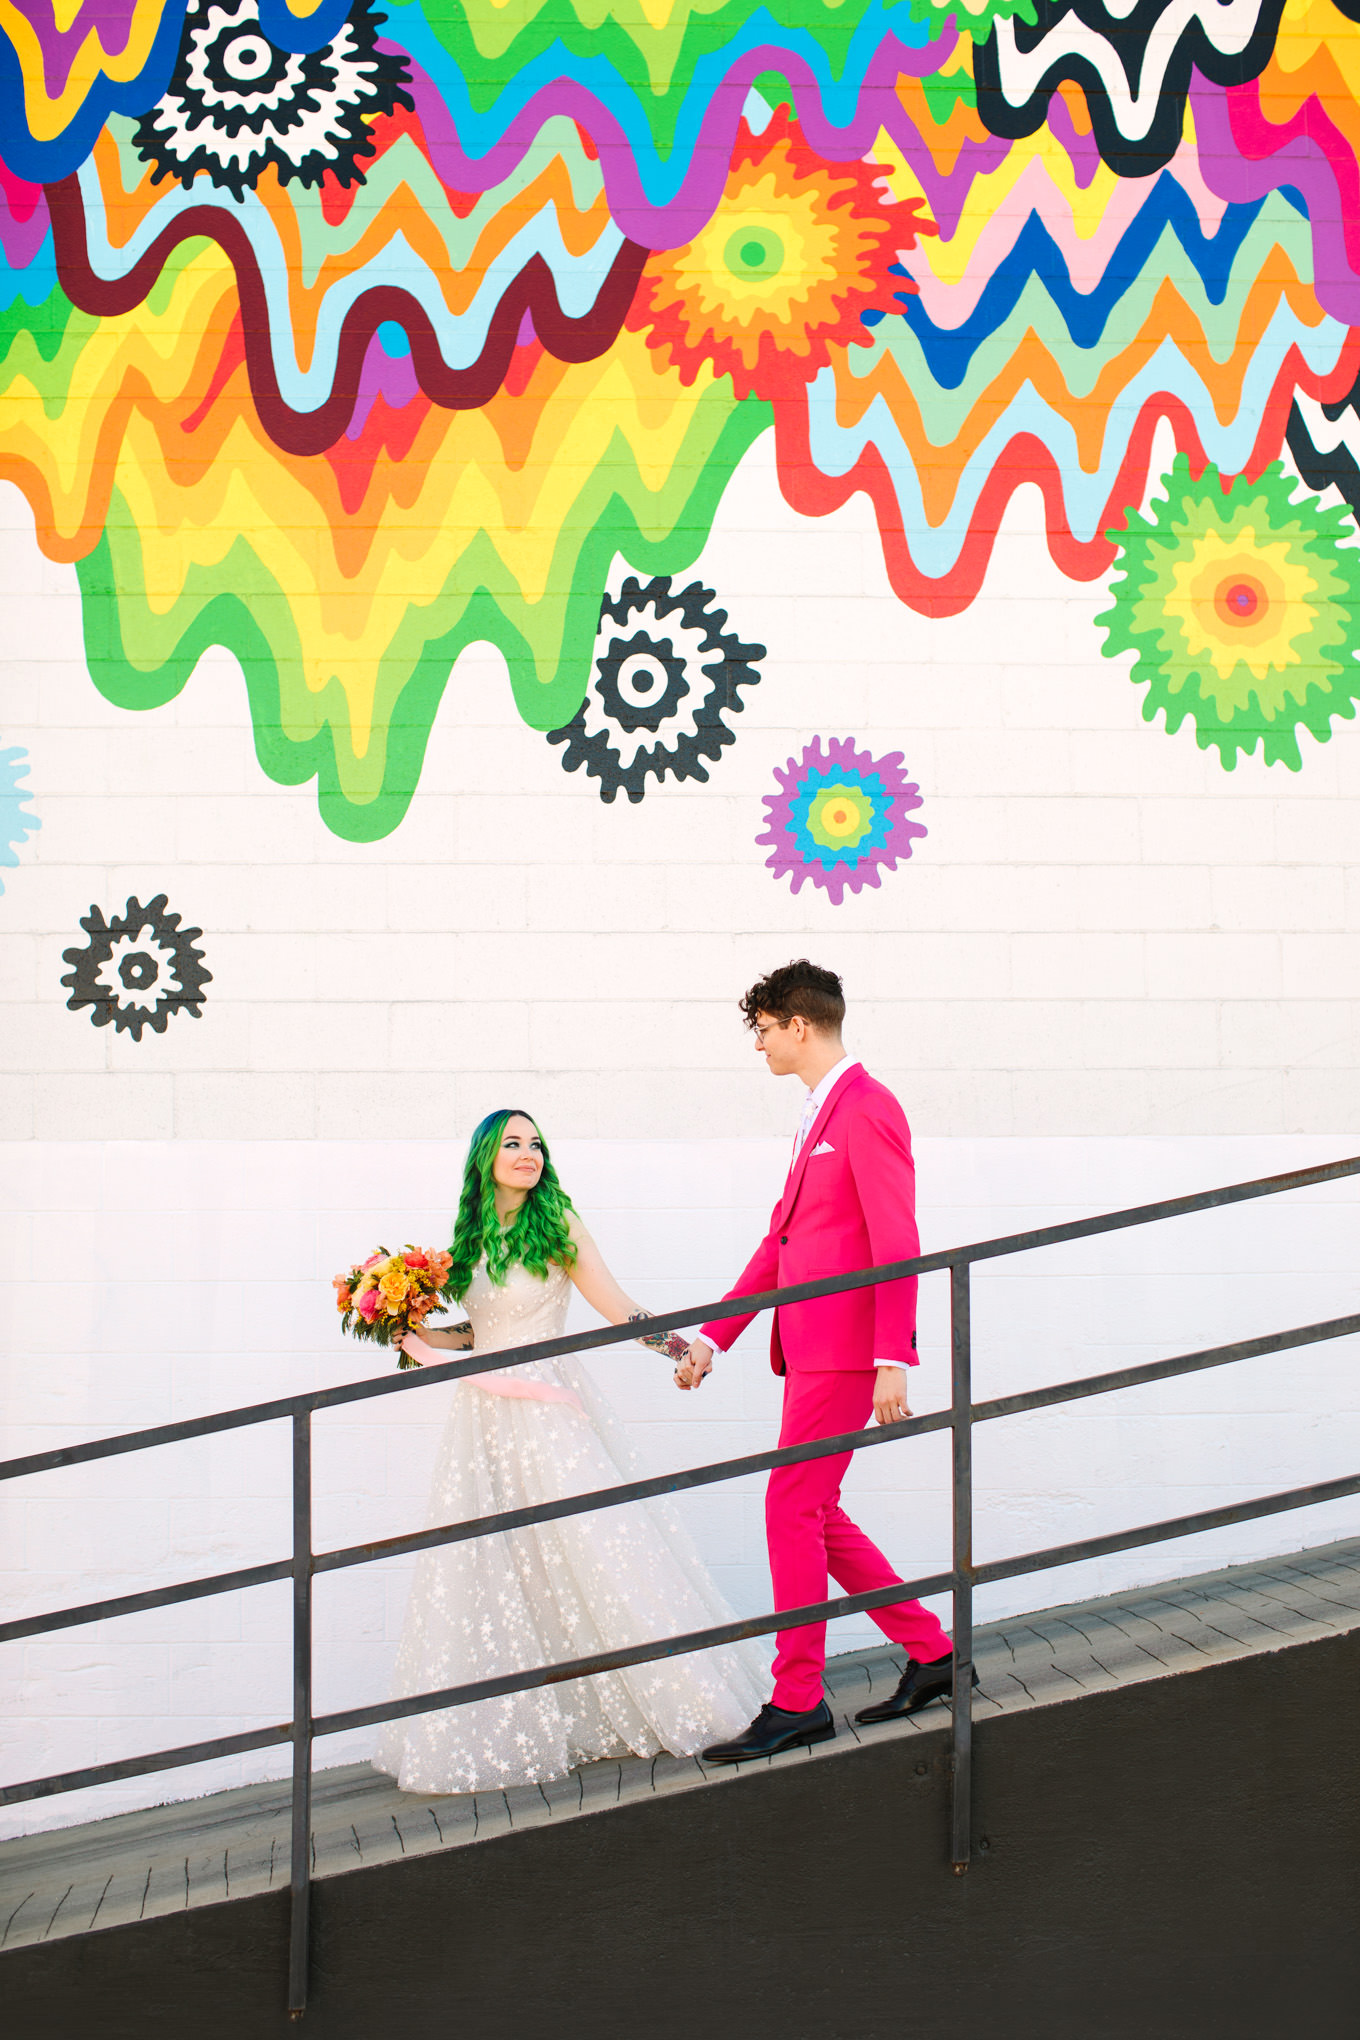 Bride with green hair and groom in pink suit in front of rainbow mural DTLA | Colorful wedding at The Unique Space Los Angeles published in The Knot Magazine | Fresh and colorful photography for fun-loving couples in Southern California | #colorfulwedding #losangeleswedding #weddingphotography #uniquespace Source: Mary Costa Photography | Los Angeles